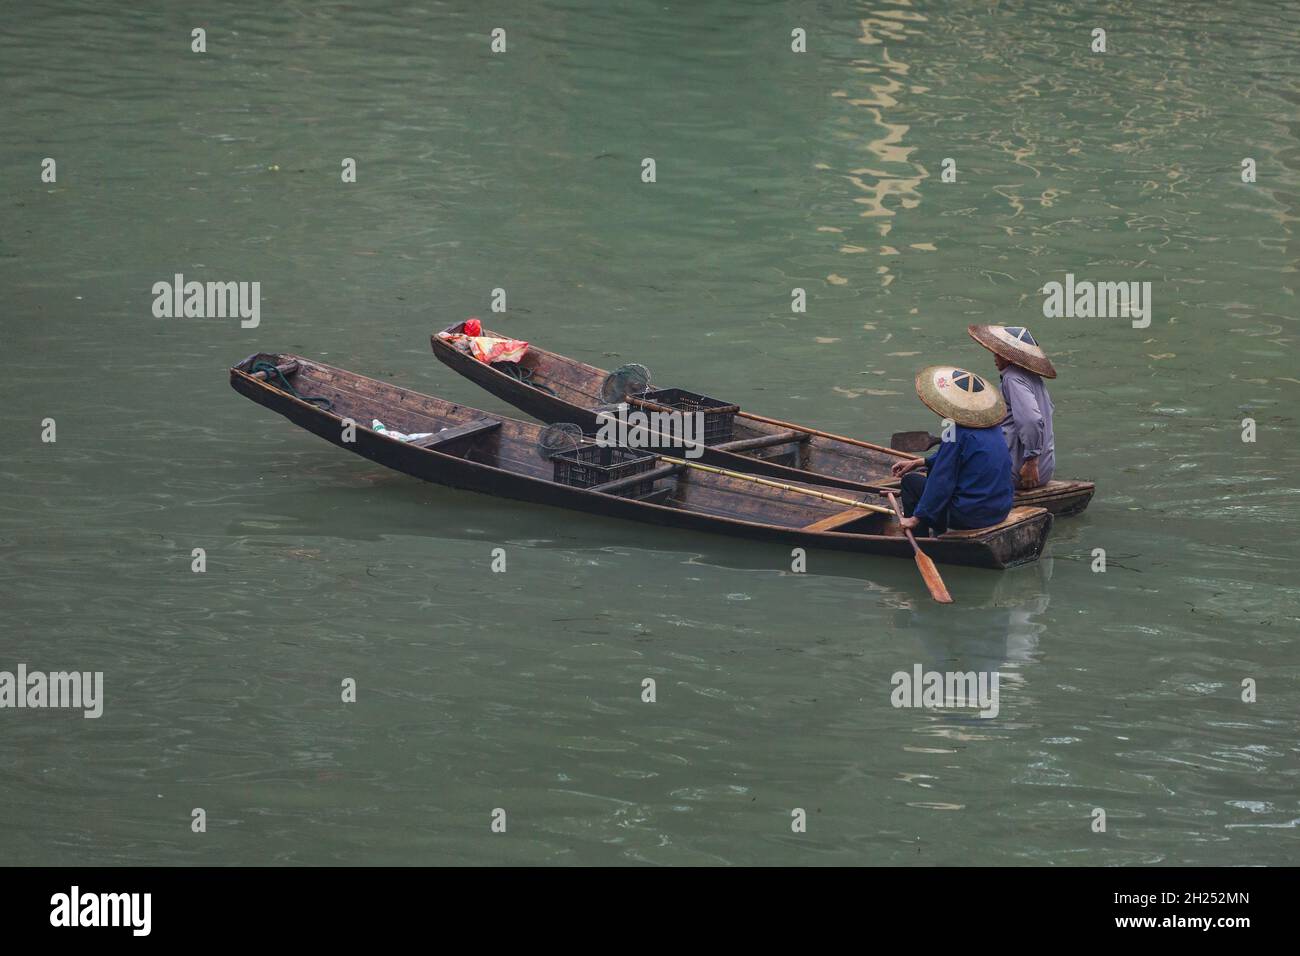 Two men in a traditional conical has paddle sampans on the Tuojiang River in Fenghuang, China. Stock Photo